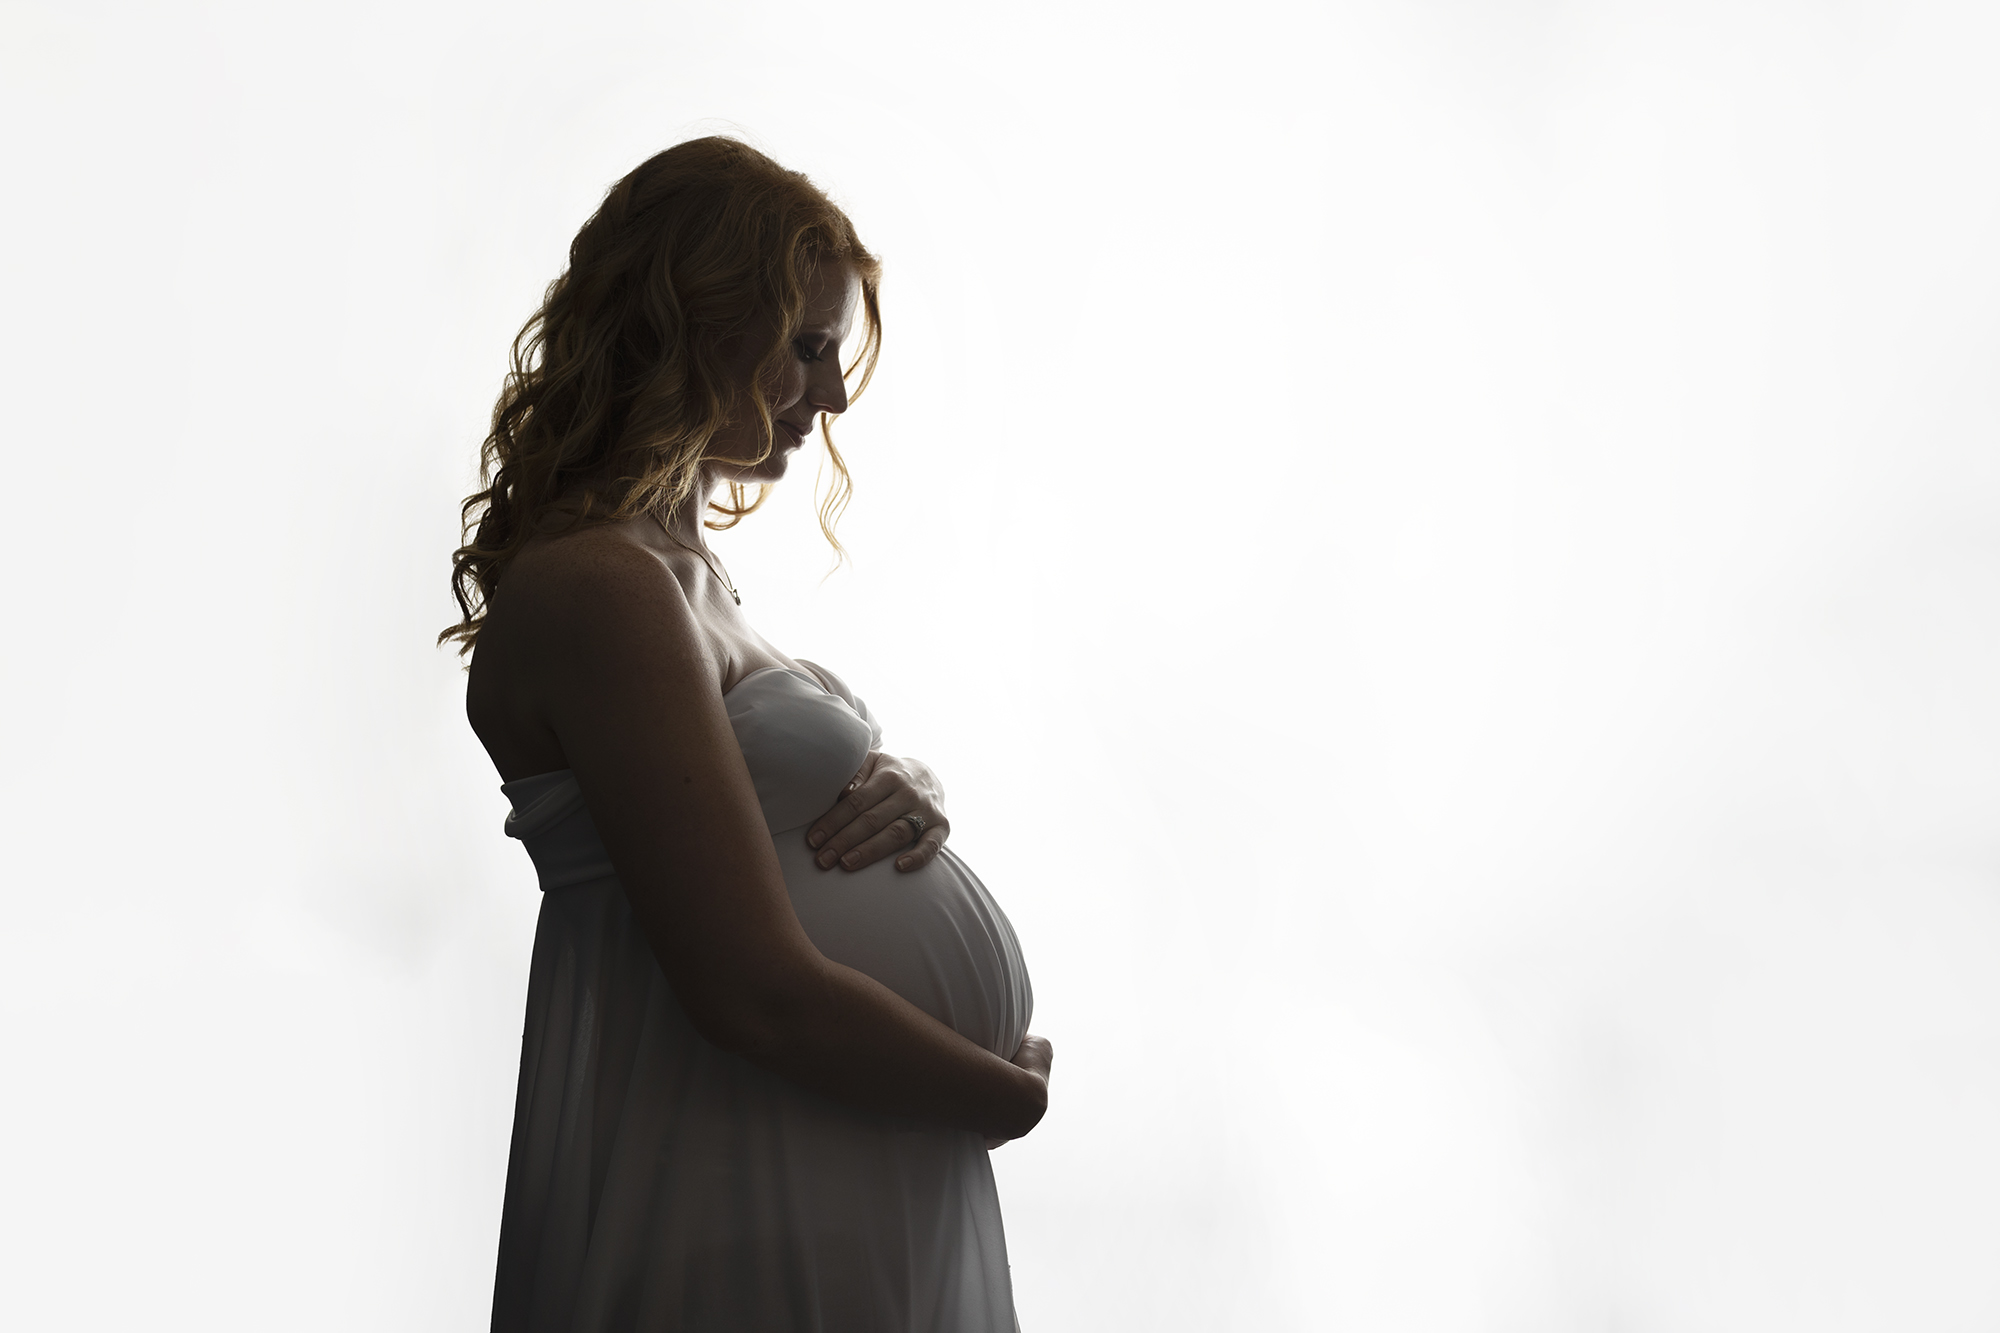 Silhouette of expectant mother wearing a white dress.